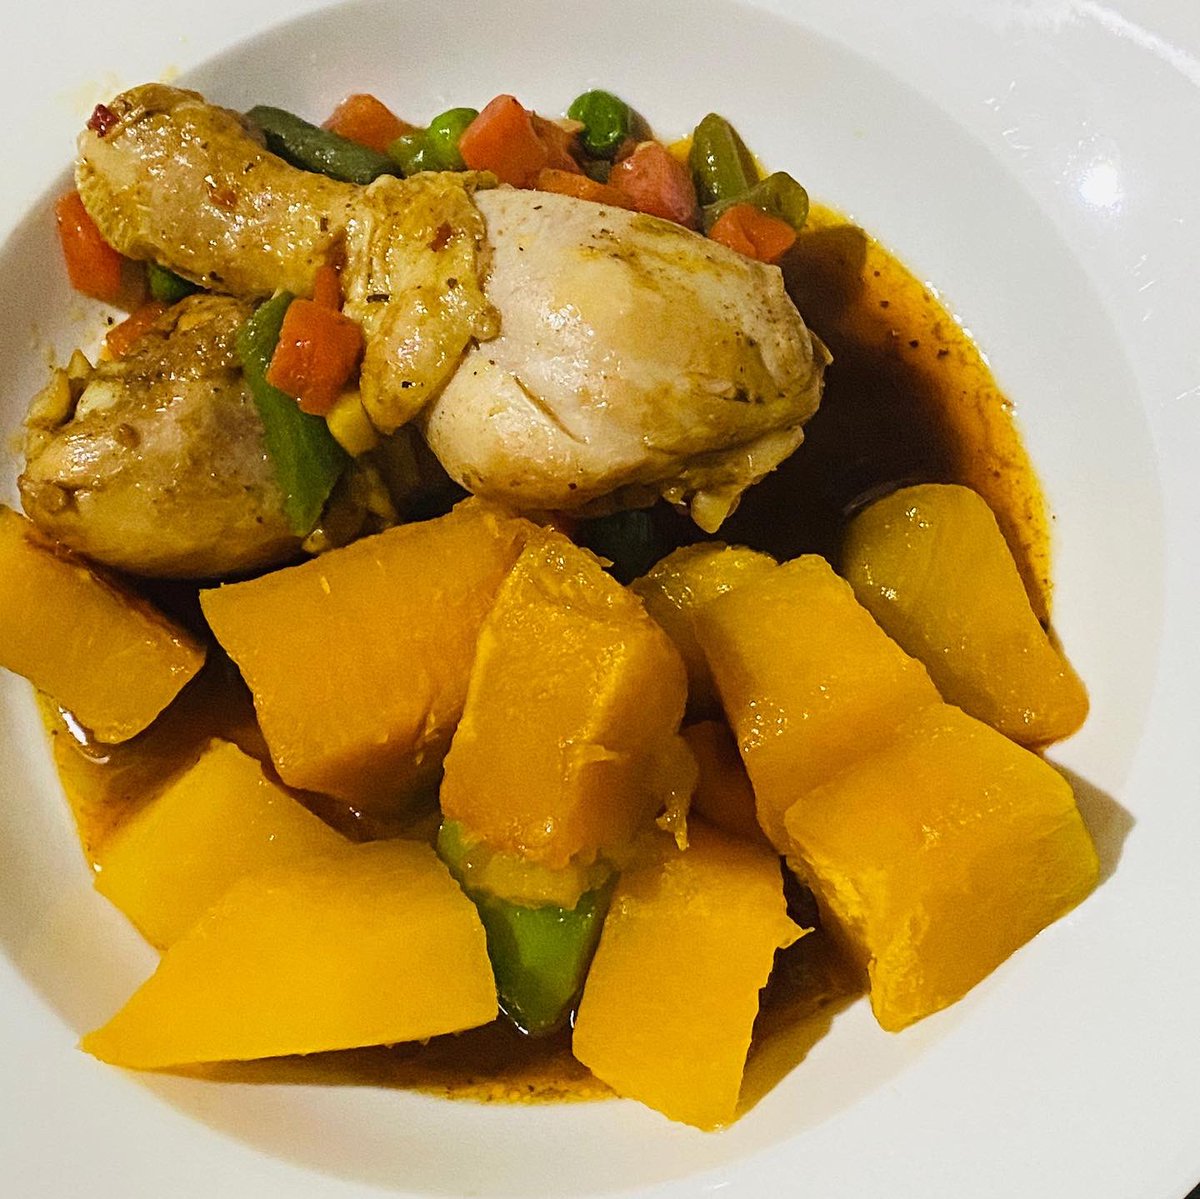 Chicken Curry with Pumpkin 🎃 I love this Pumpkin to bits 😋
#Banting101
#lowcarbrecipes 
#LowcarbLifestyle